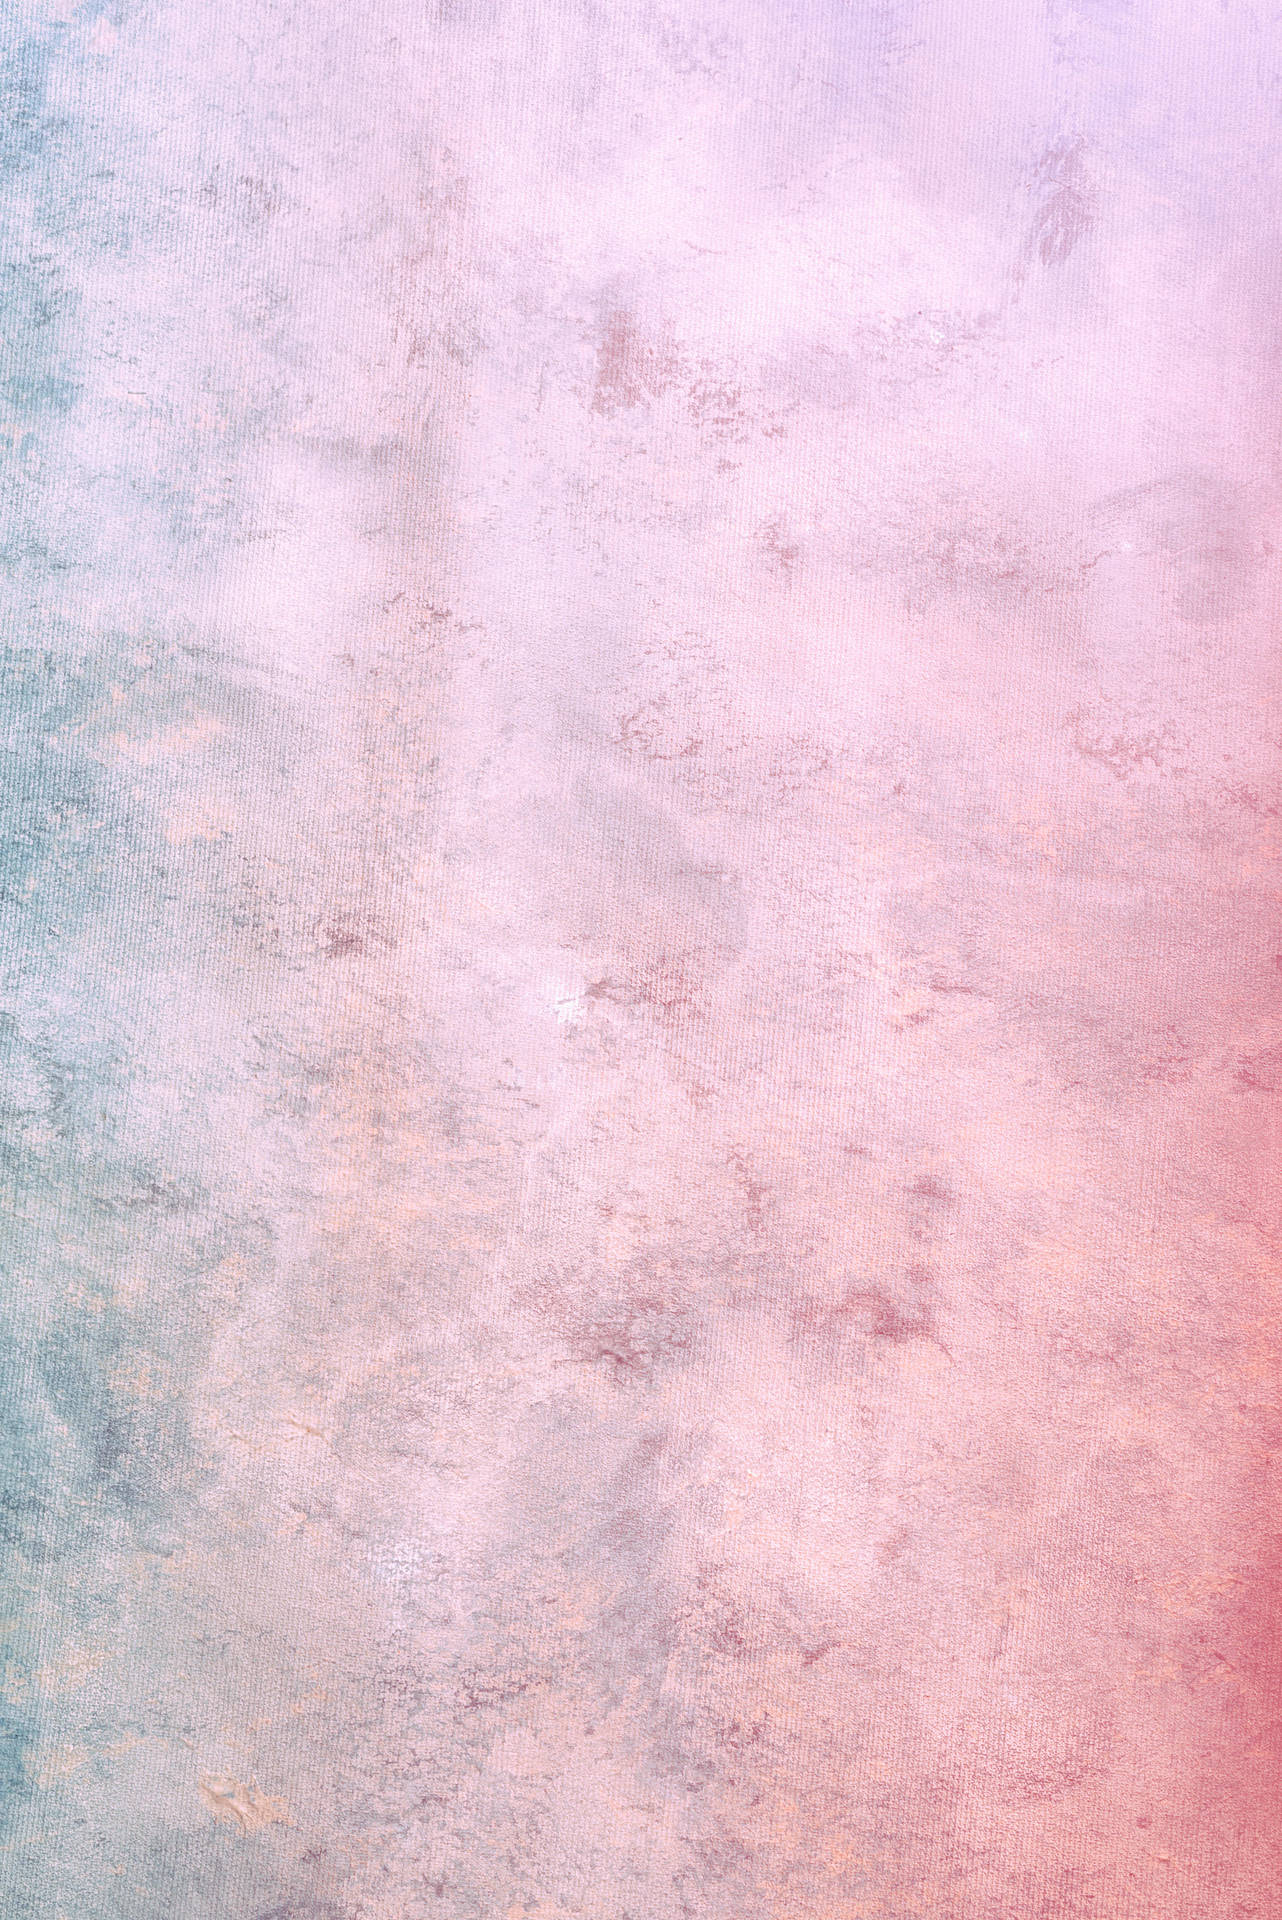 Concrete Texture Pink And Blue Wallpaper